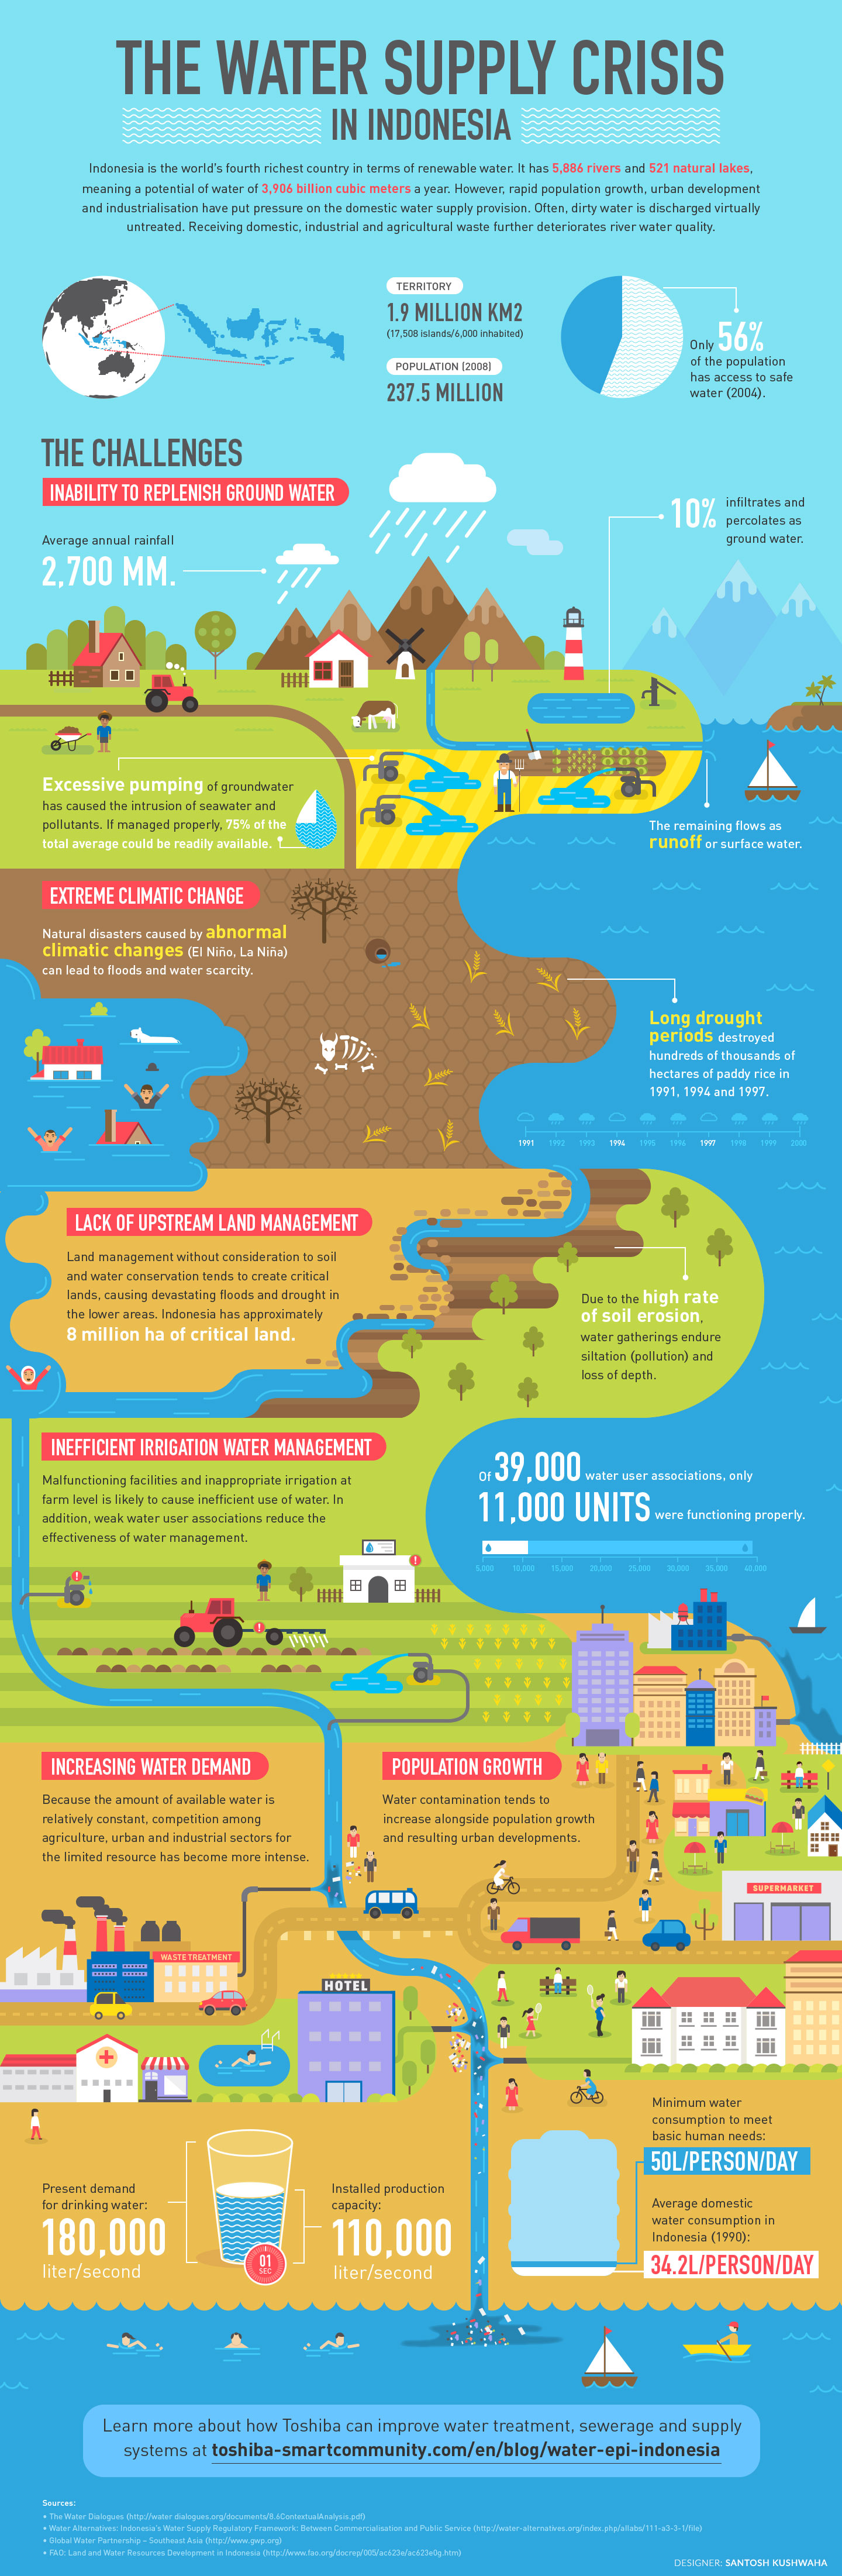 THE WATER SUPPLY CRISIS IN INDONESIA | INFOGRAPHIC